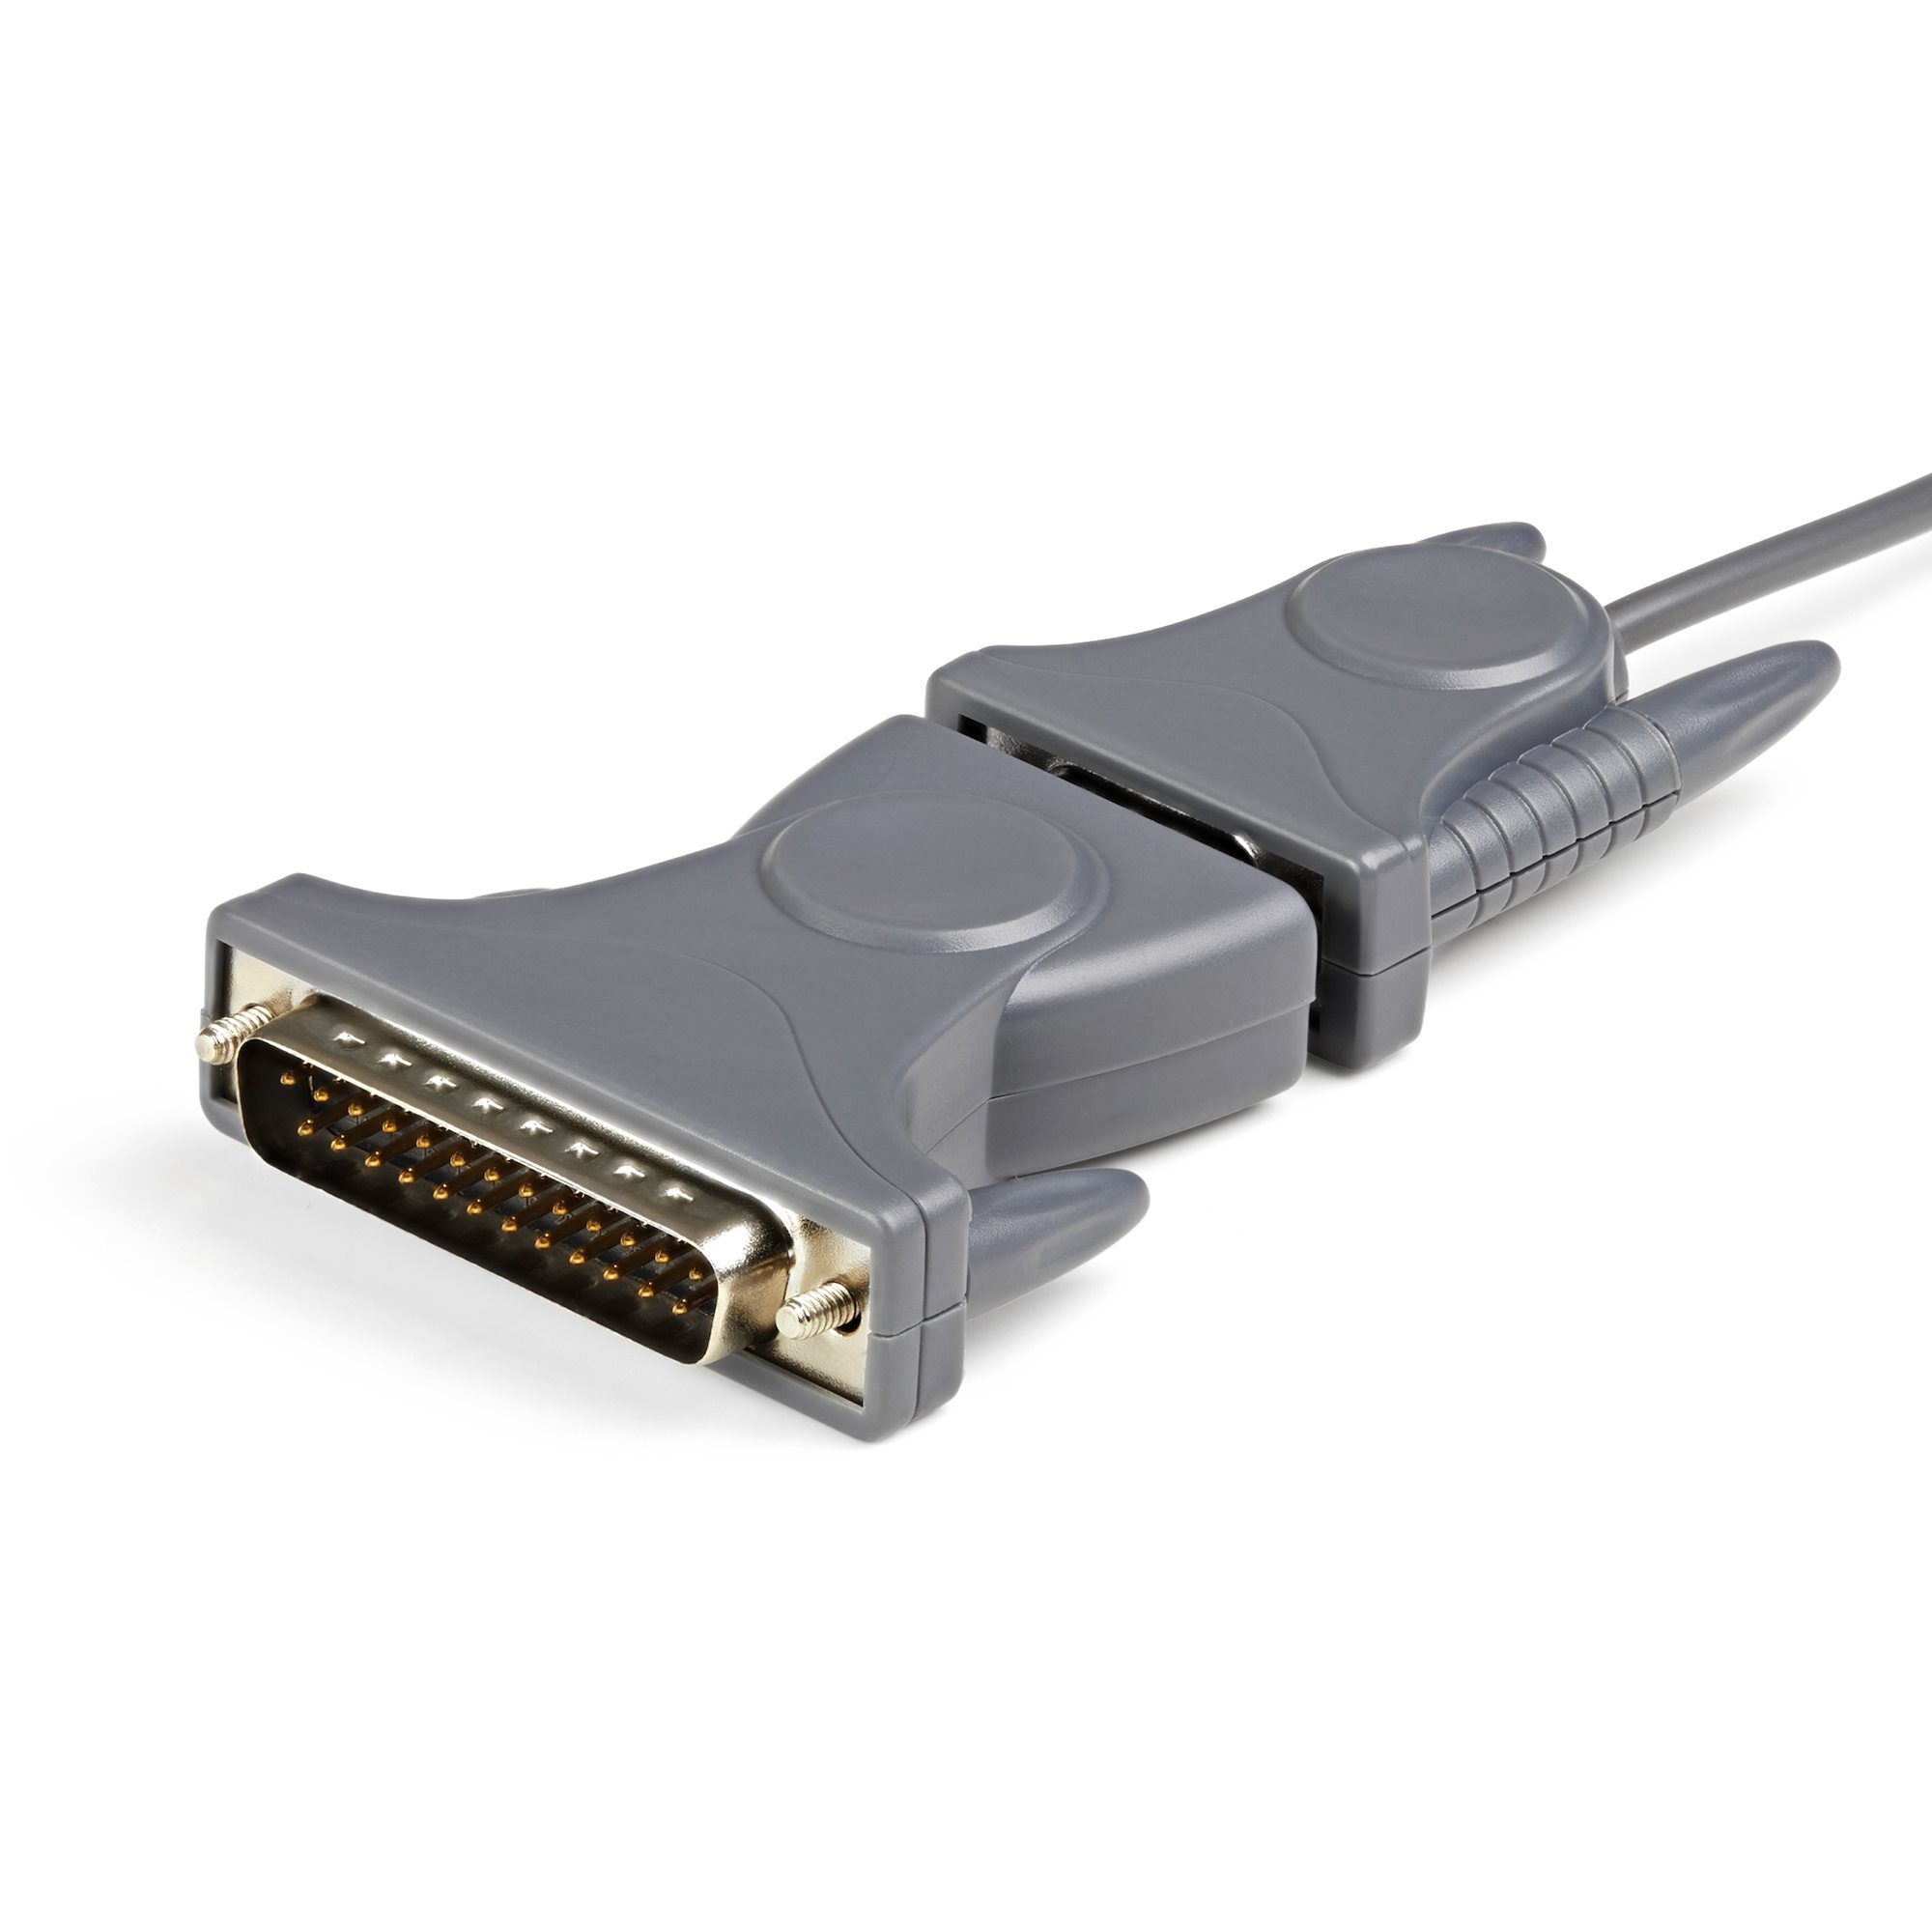 StarTech.com USB to RS232 DB9/DB25 Serial Adapter Cable - M/M